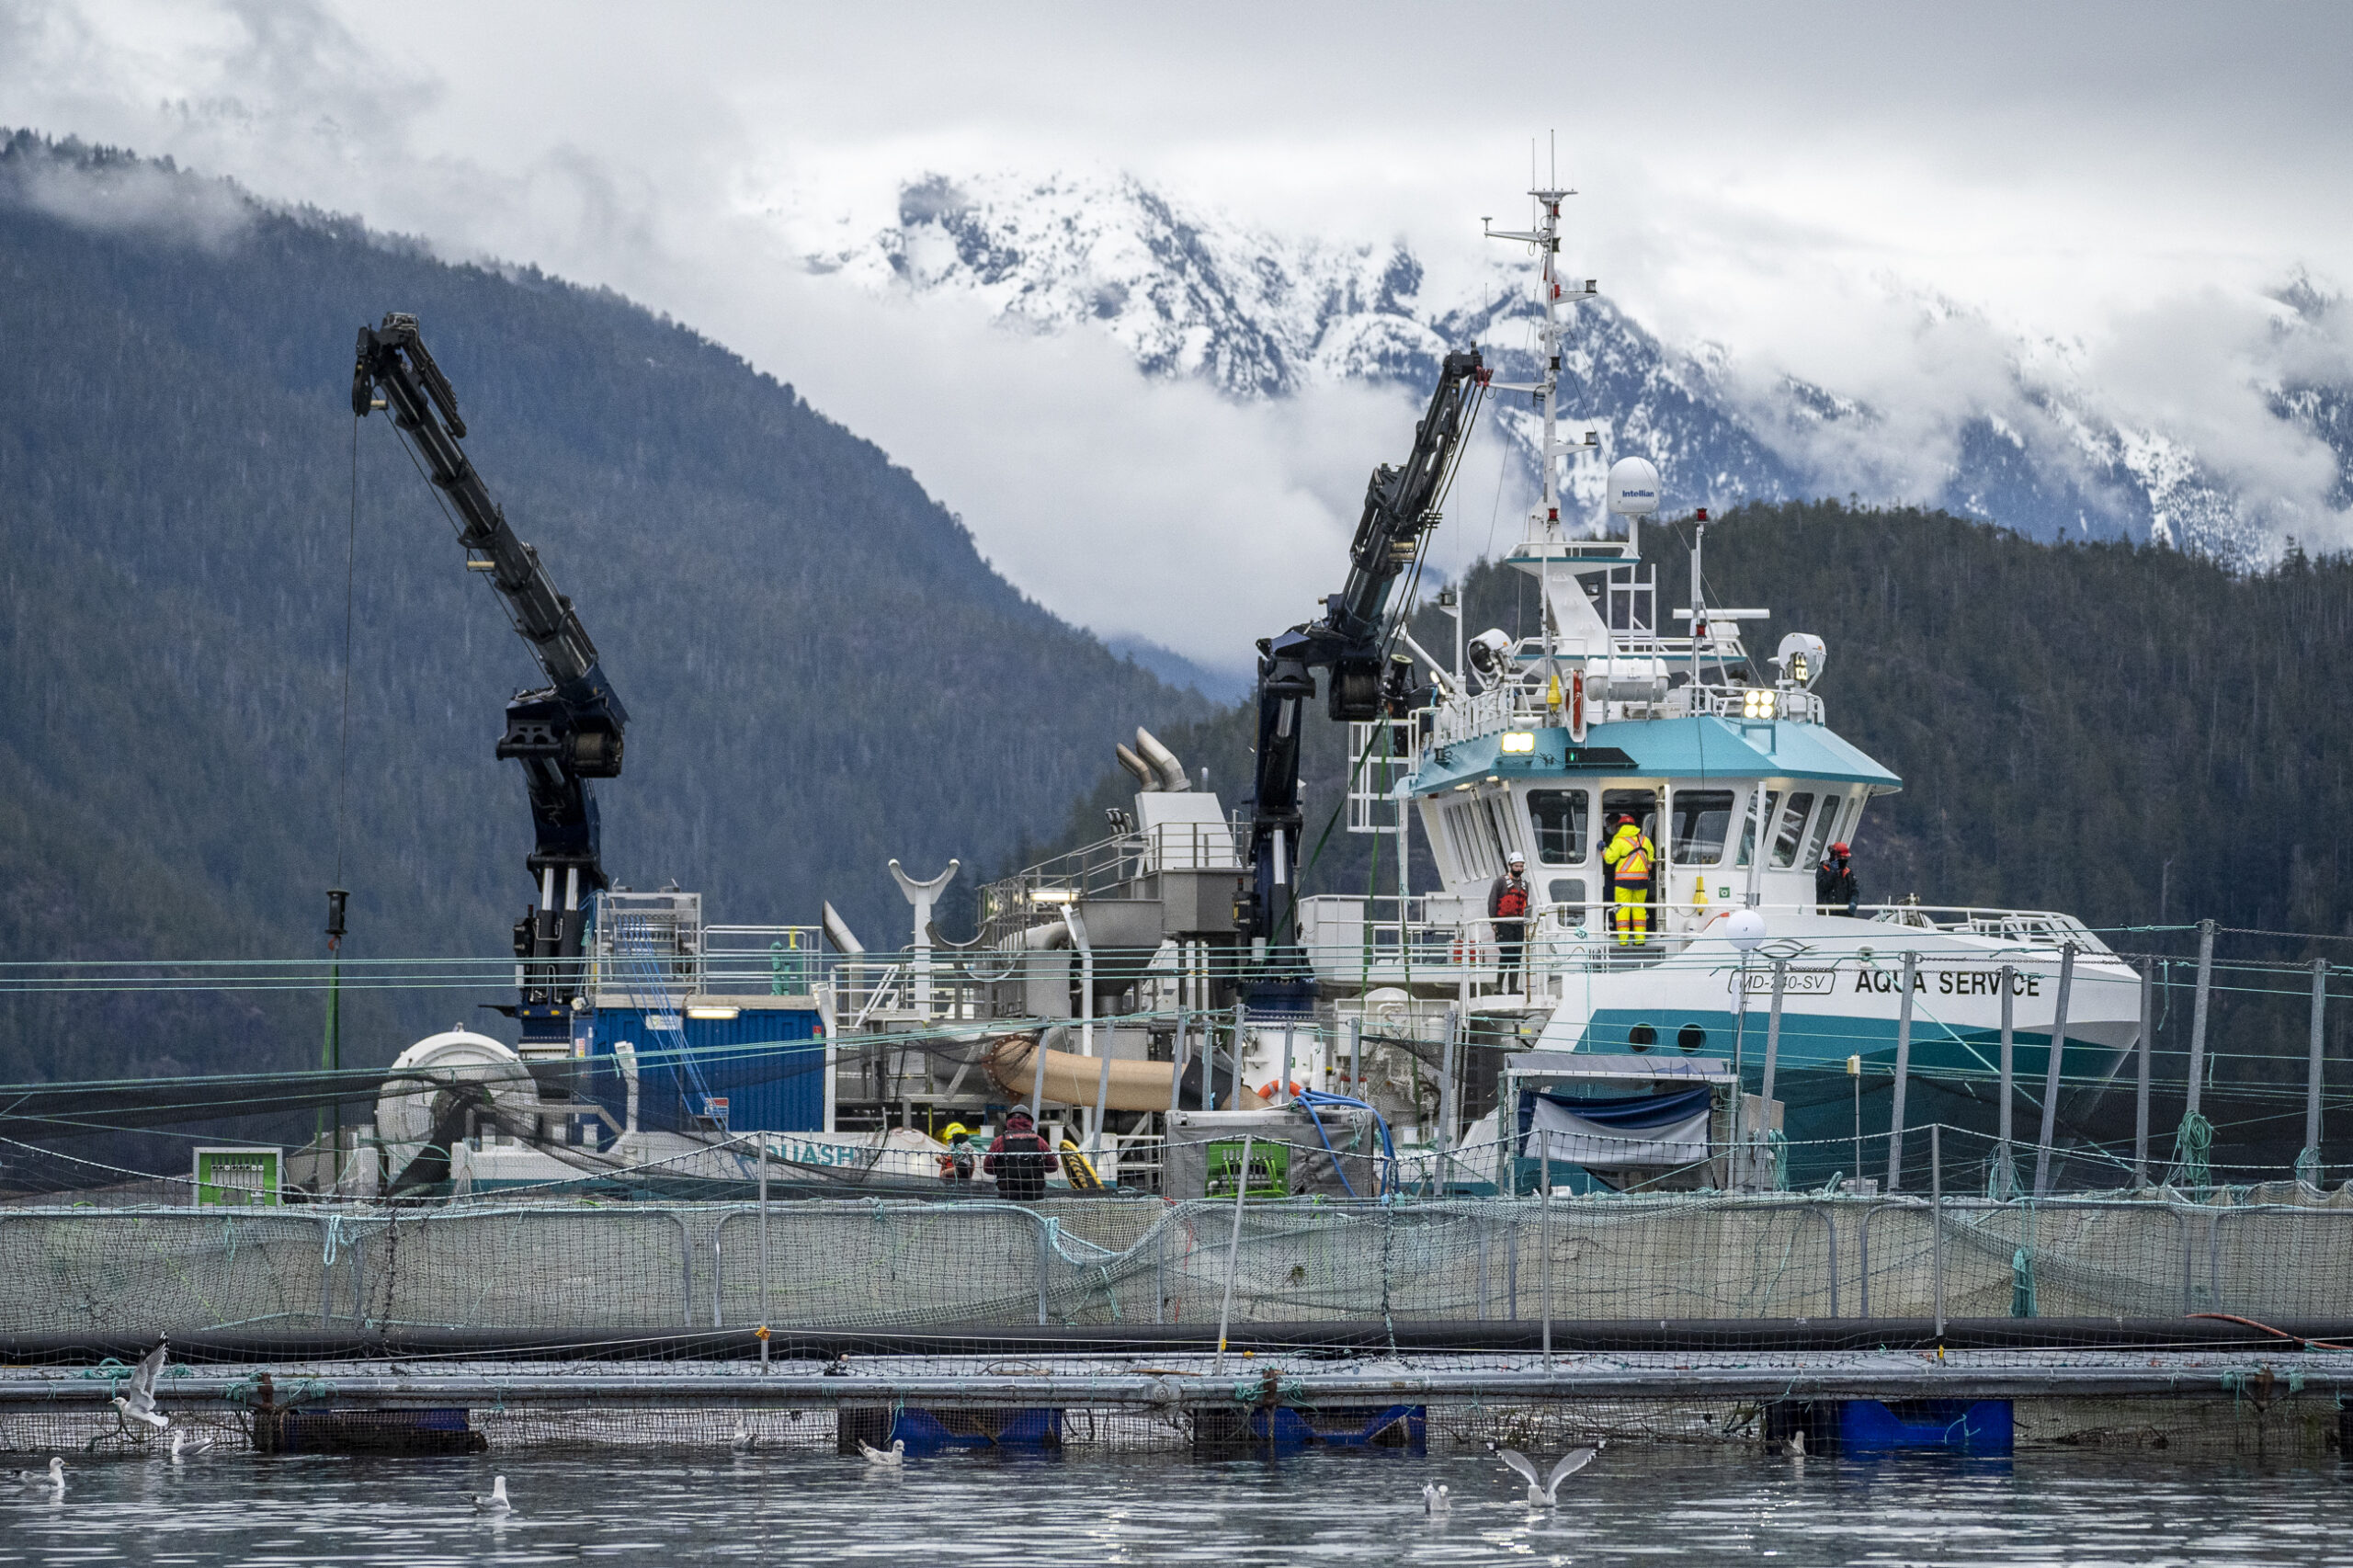 A boat used to remove sea lice from farmed salmon in the water in Tofino, B.C.